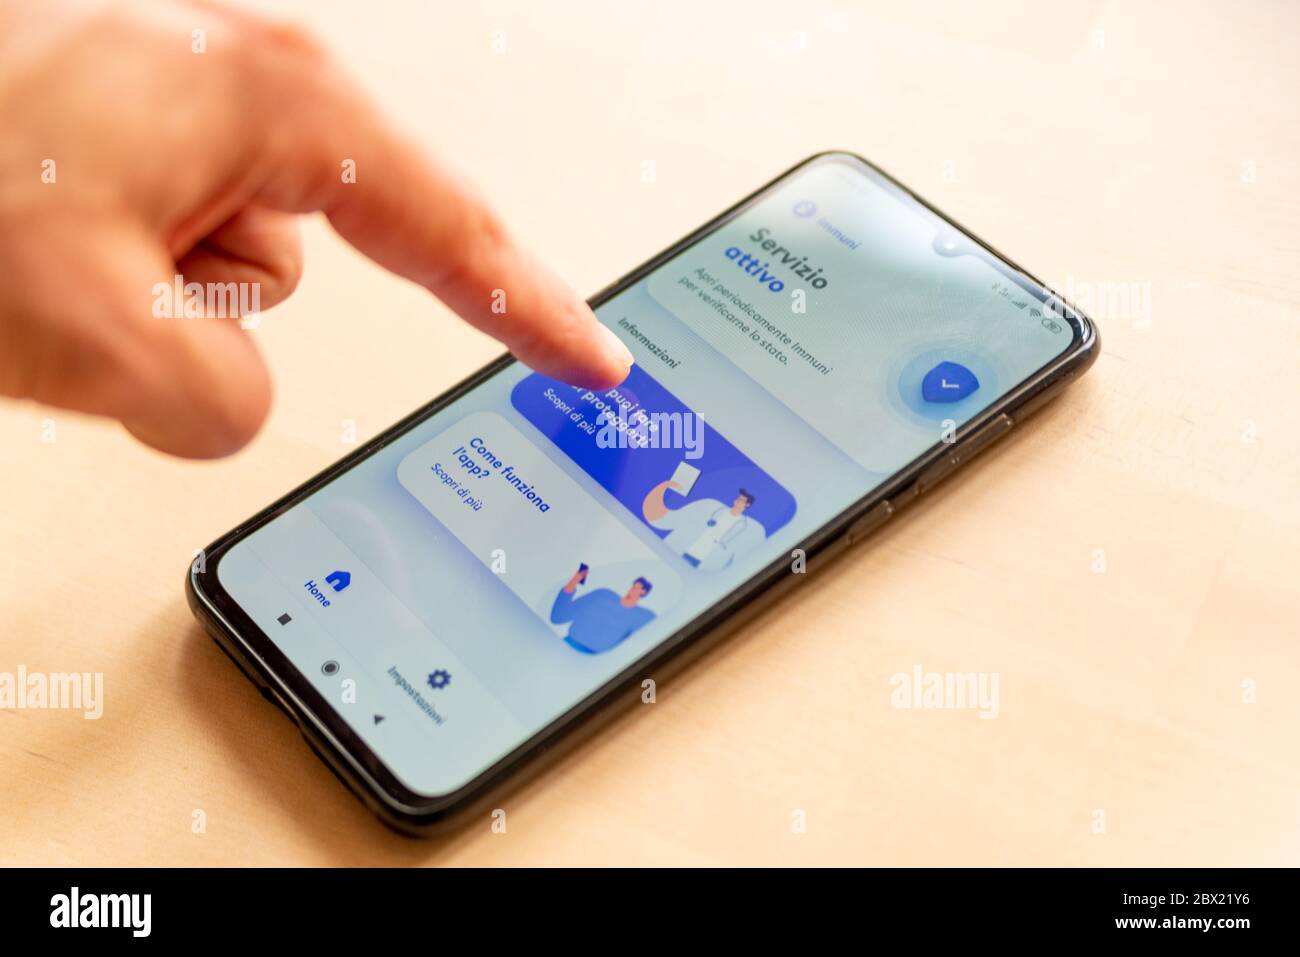 Rome, Italy - 1 june 2020: close up of hand with immuni mobile contact tracing app, technology used to control the coronavirus pandemic spread Stock Photo